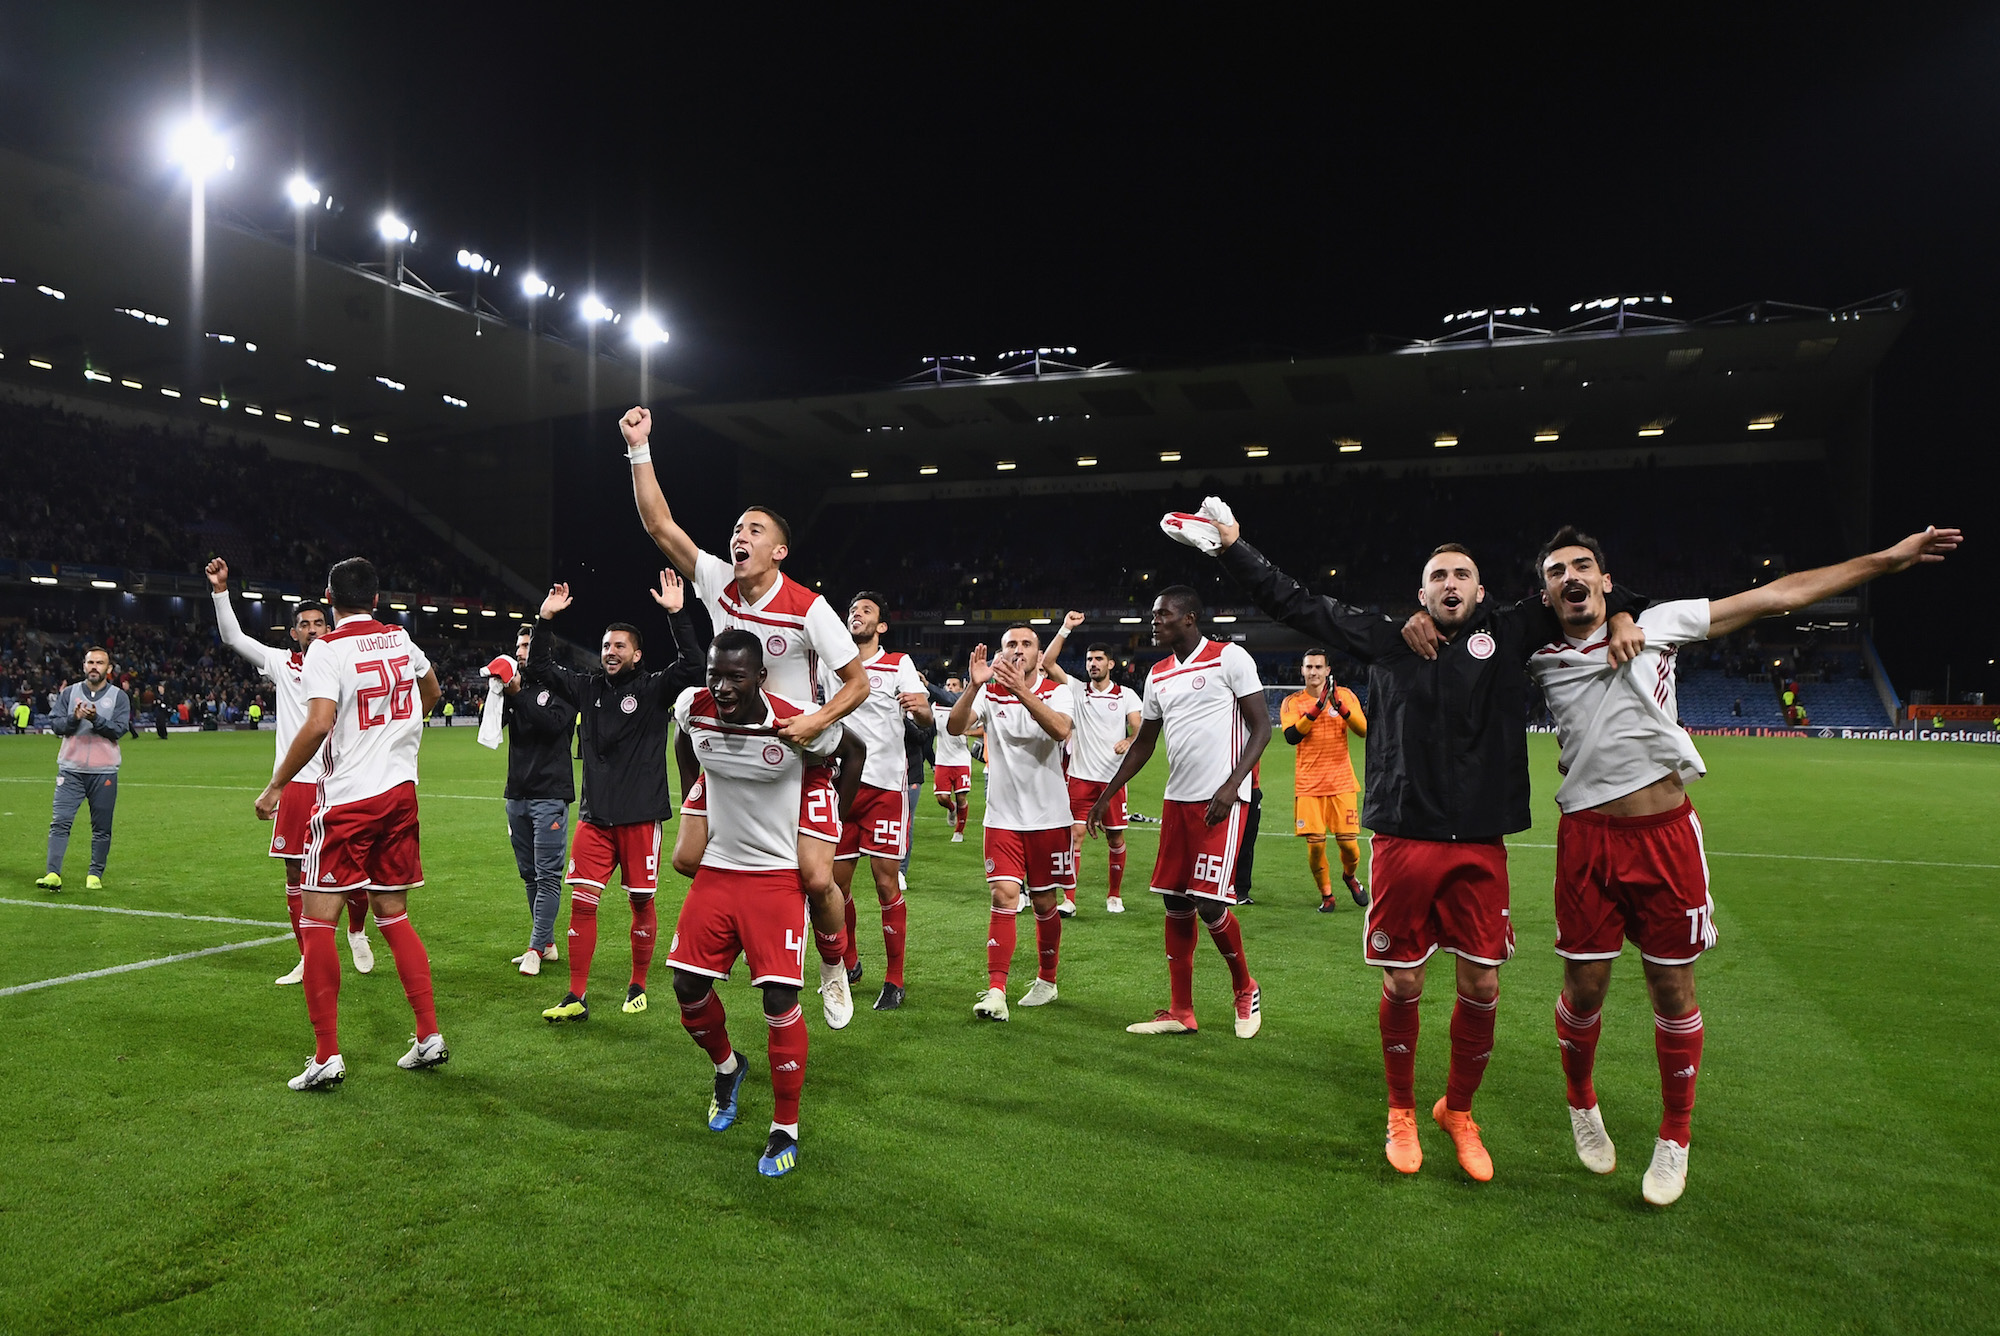 BURNLEY, ENGLAND - AUGUST 30: Olympiakos celebrate in front of their fans after the UEFA Europa League qualifing second leg play off match between Burnley and Olympiakos at Turf Moor on August 30, 2018 in Burnley, England. (Photo by Clive Mason/Getty Images)